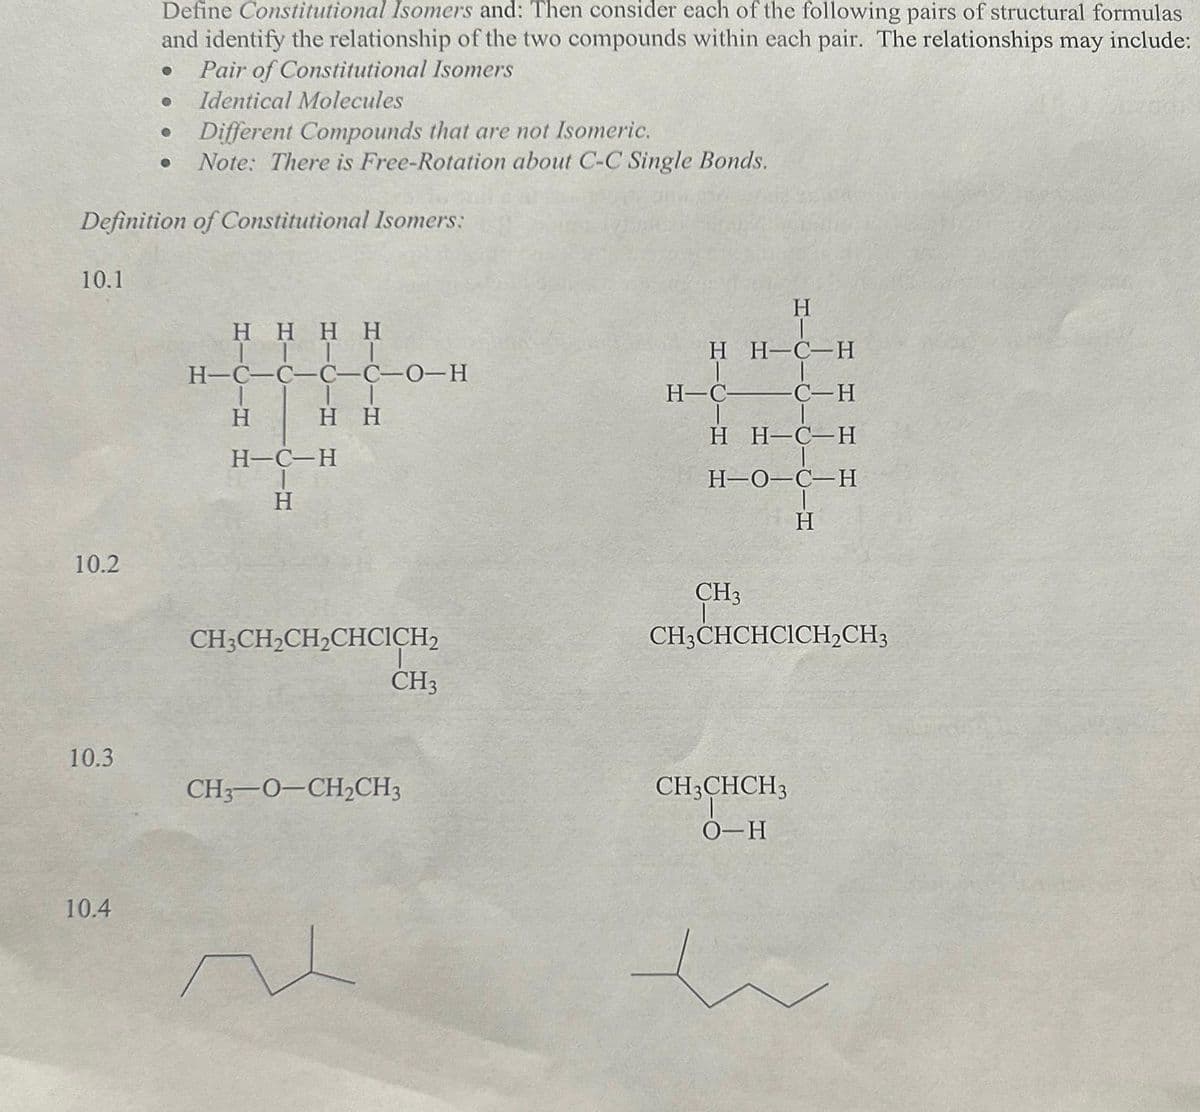 10.1
10.2
10.3
Define Constitutional Isomers and: Then consider each of the following pairs of structural formulas
and identify the relationship of the two compounds within each pair. The relationships may include:
● Pair of Constitutional Isomers
Definition of Constitutional Isomers:
10.4
● Identical Molecules
Different Compounds that are not Isomeric.
Note: There is Free-Rotation about C-C Single Bonds.
●
●
HHHH
ITTI
H-C-C-C-C-0-H
IT
H H
H
H-C-H
H
CH3CH₂CH₂CHCICH2
CH3
CH3-O-CH₂CH3
H
H H-C-H
H-CC-H
H H-C-H
H-O-C-H
H
CH3
CH3CHCHCICH₂CH3
CH3CHCH3
O-H